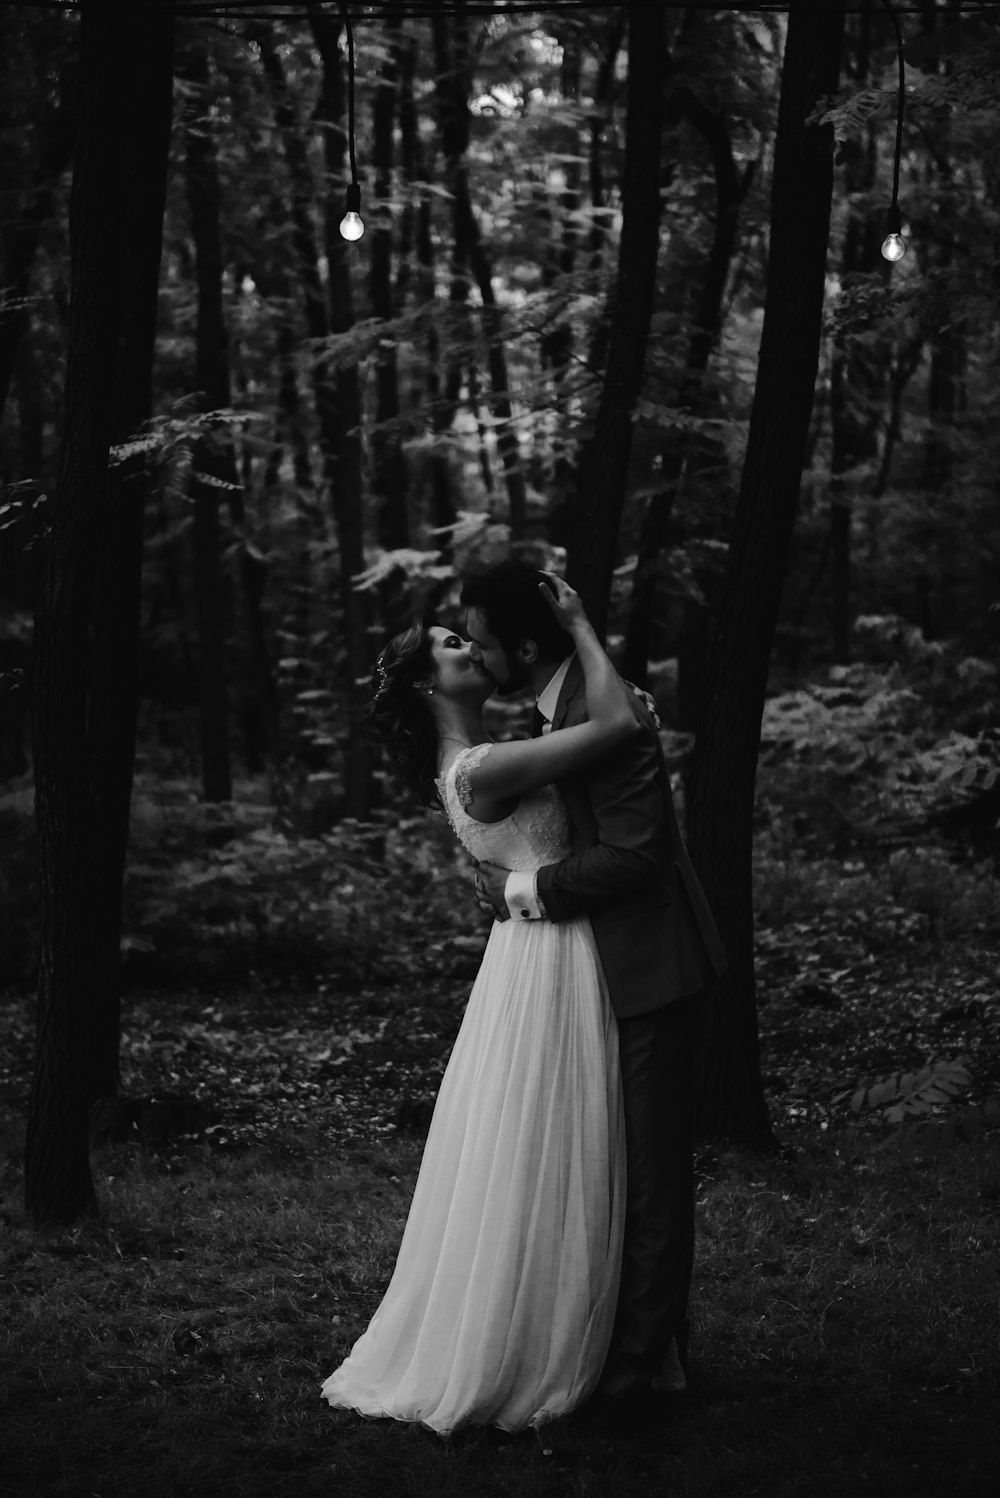 grayscale photo of couple kissing under forest trees